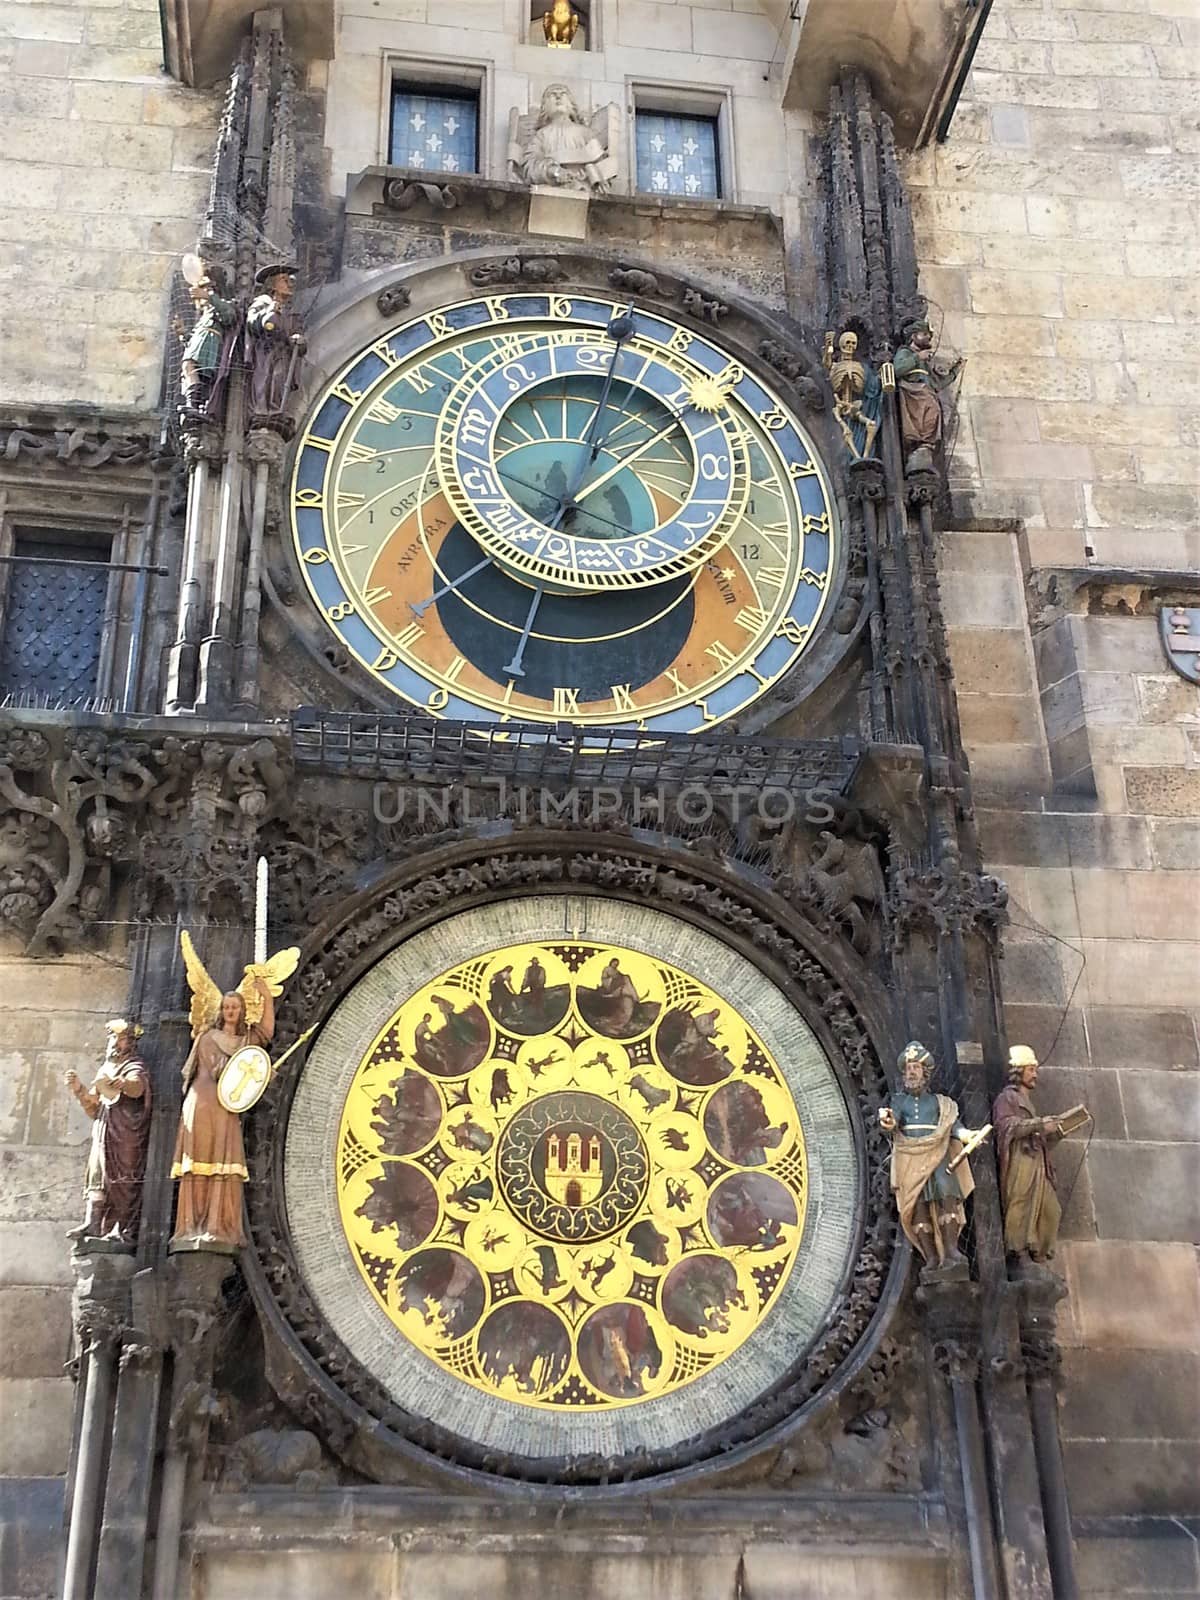 Medieval astronomical clock in the city center of Prague by pisces2386